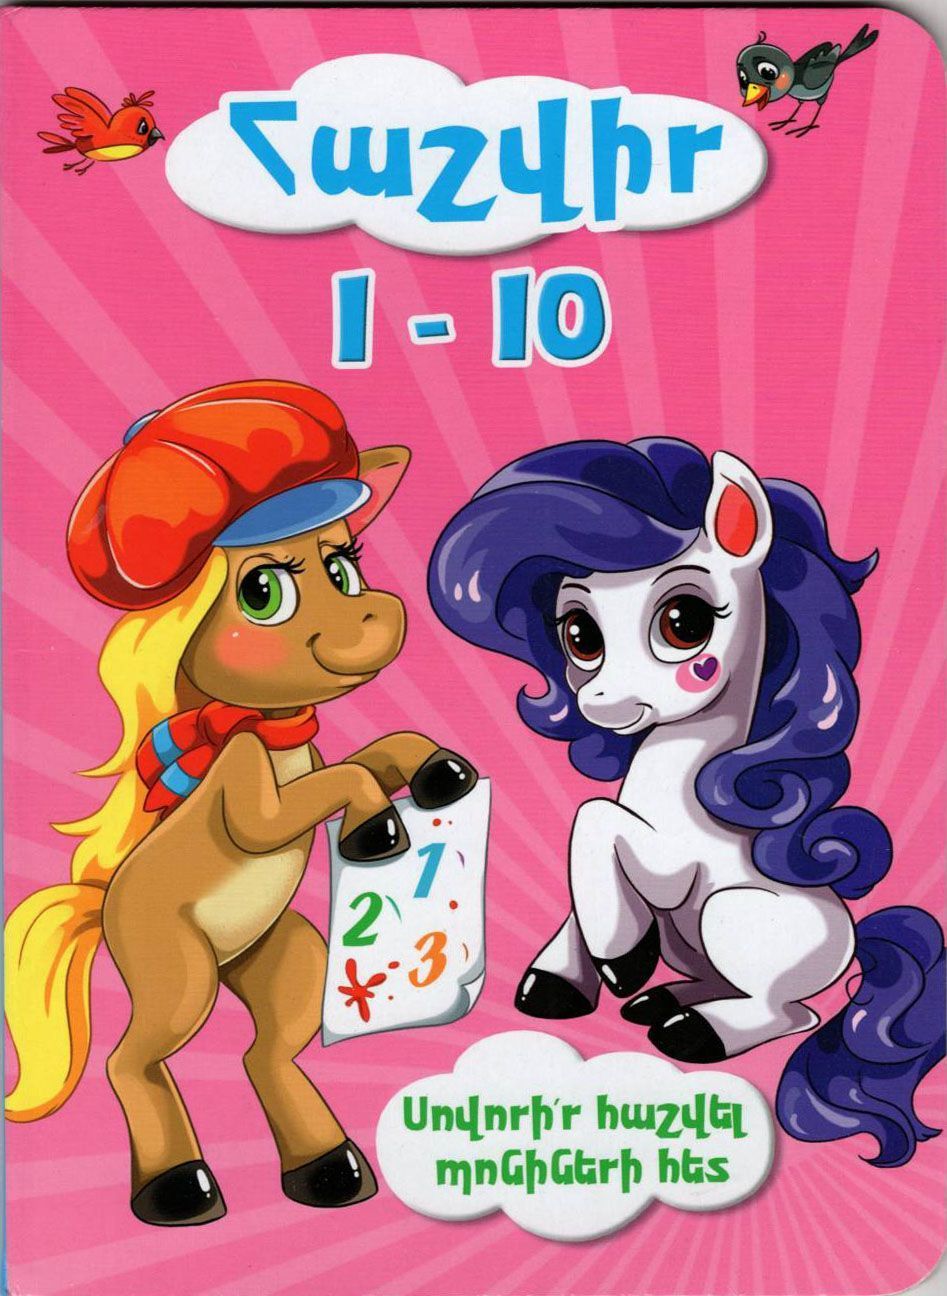 Count 1-10 with Ponies